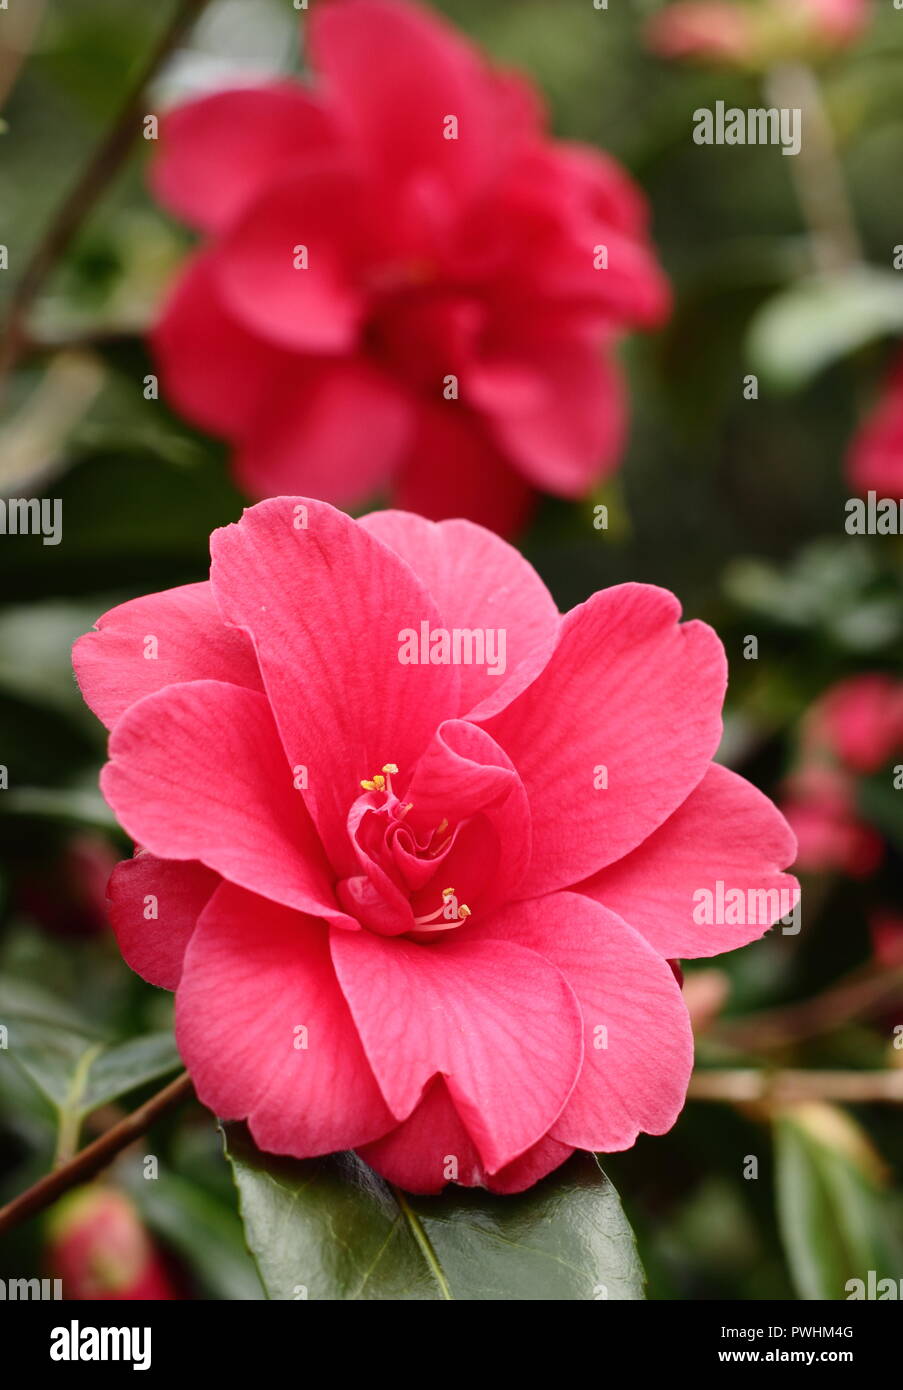 Blossoms of Camellia x williamsii Celebration in spring in an English garden Stock Photo